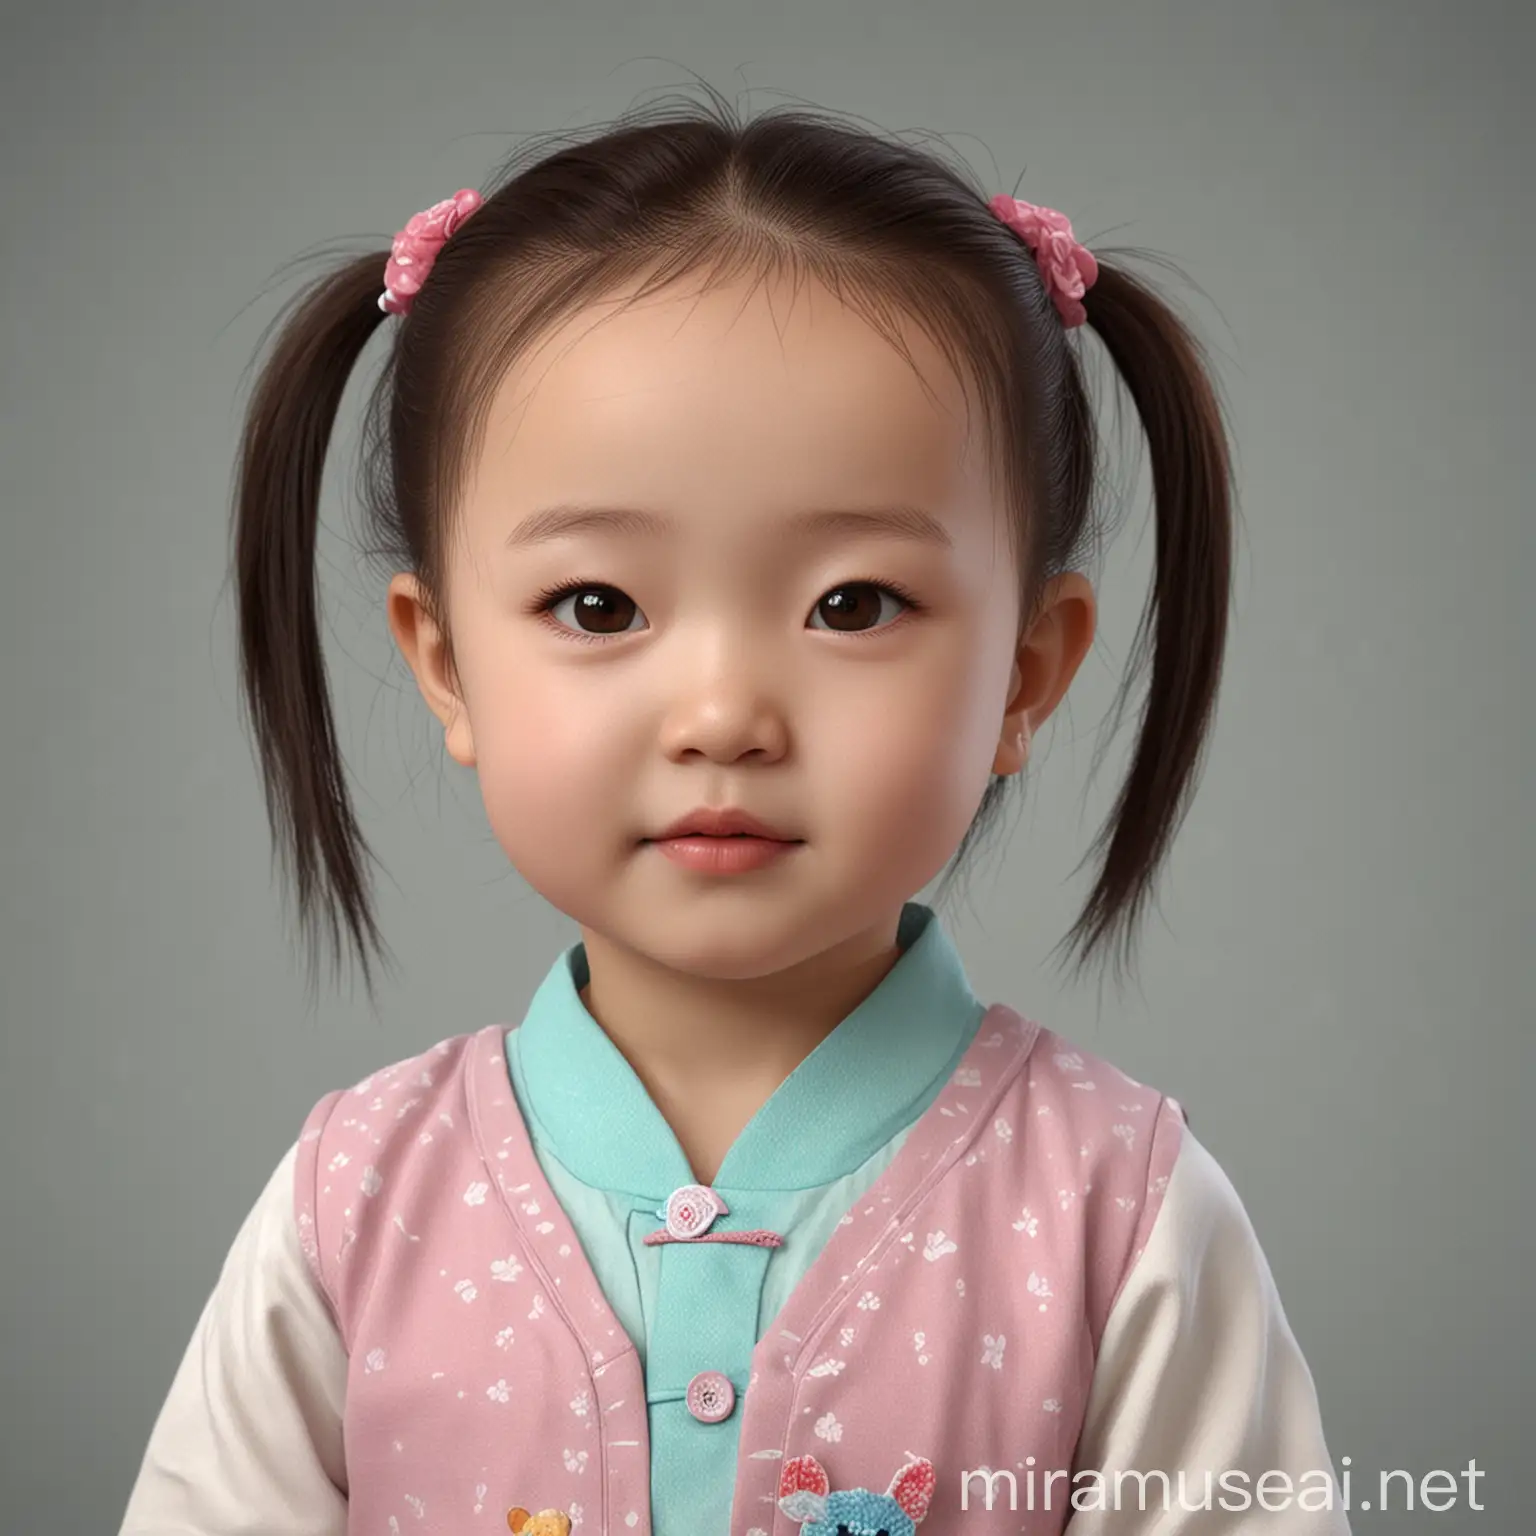 Adorable Chinese Child in 3D Photo